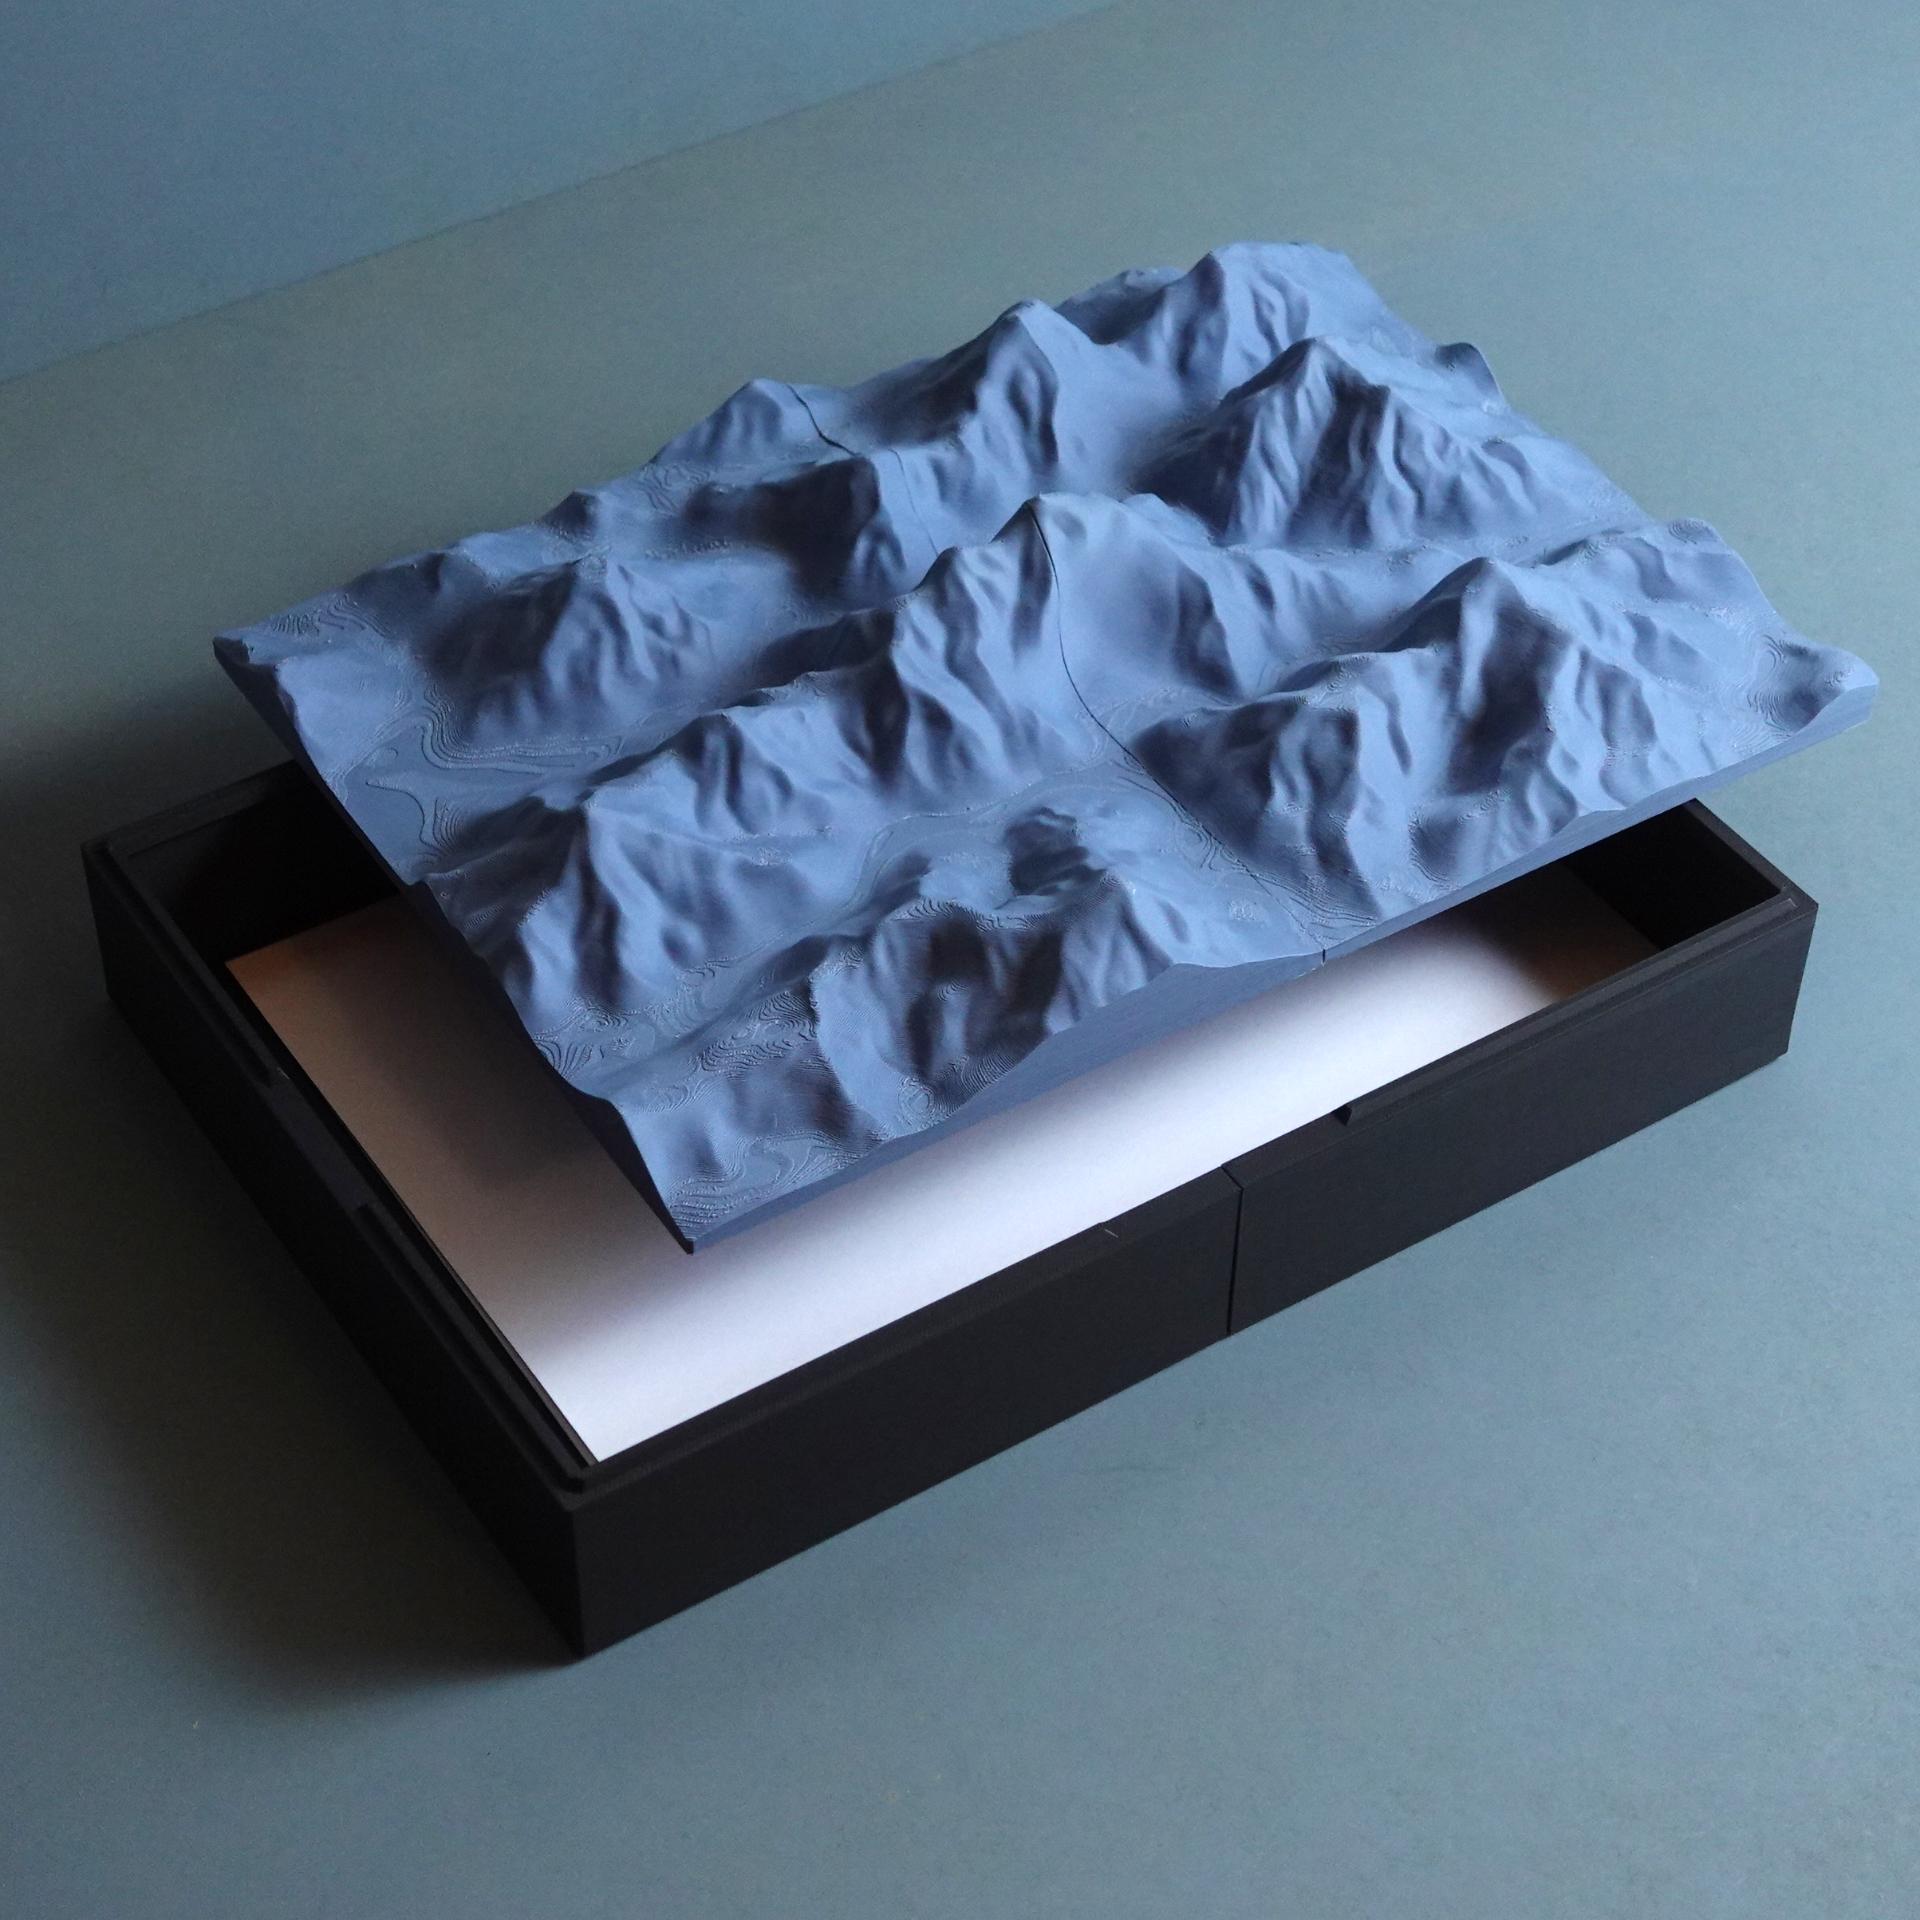 Desk paper tray and organizer “Montagne” 3d model